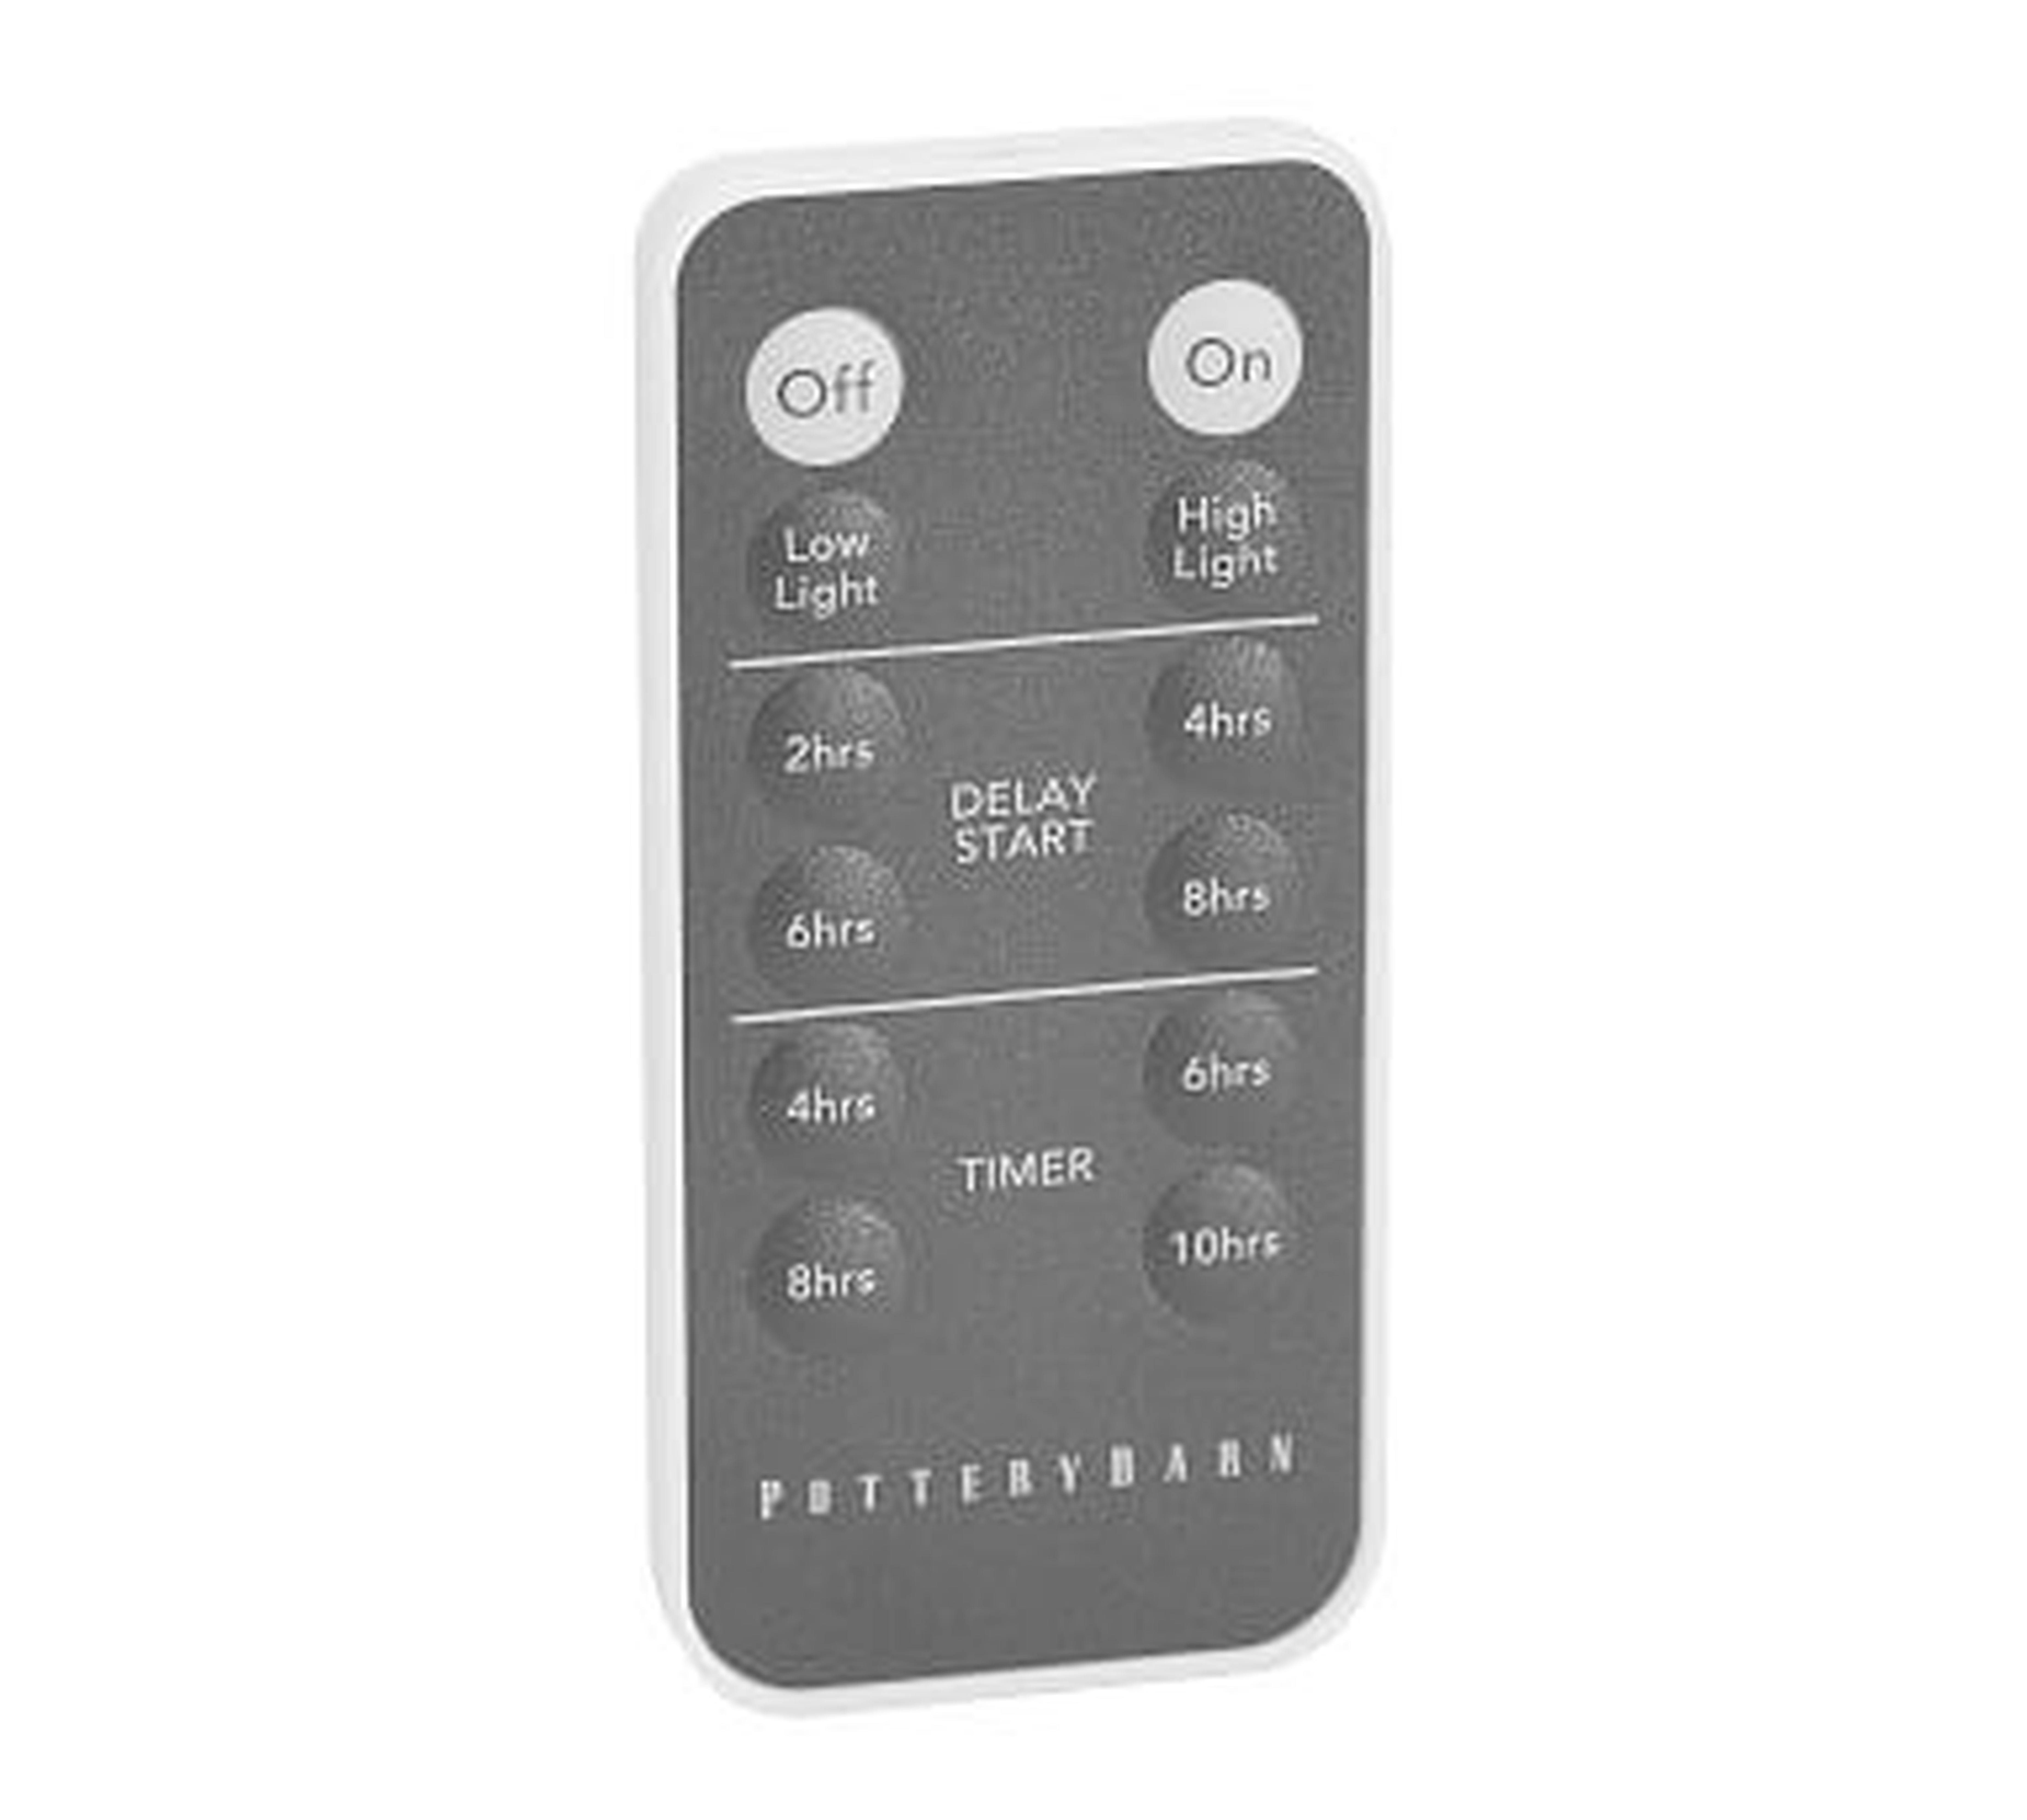 Standard Flameless Candle Remote Control - Pottery Barn